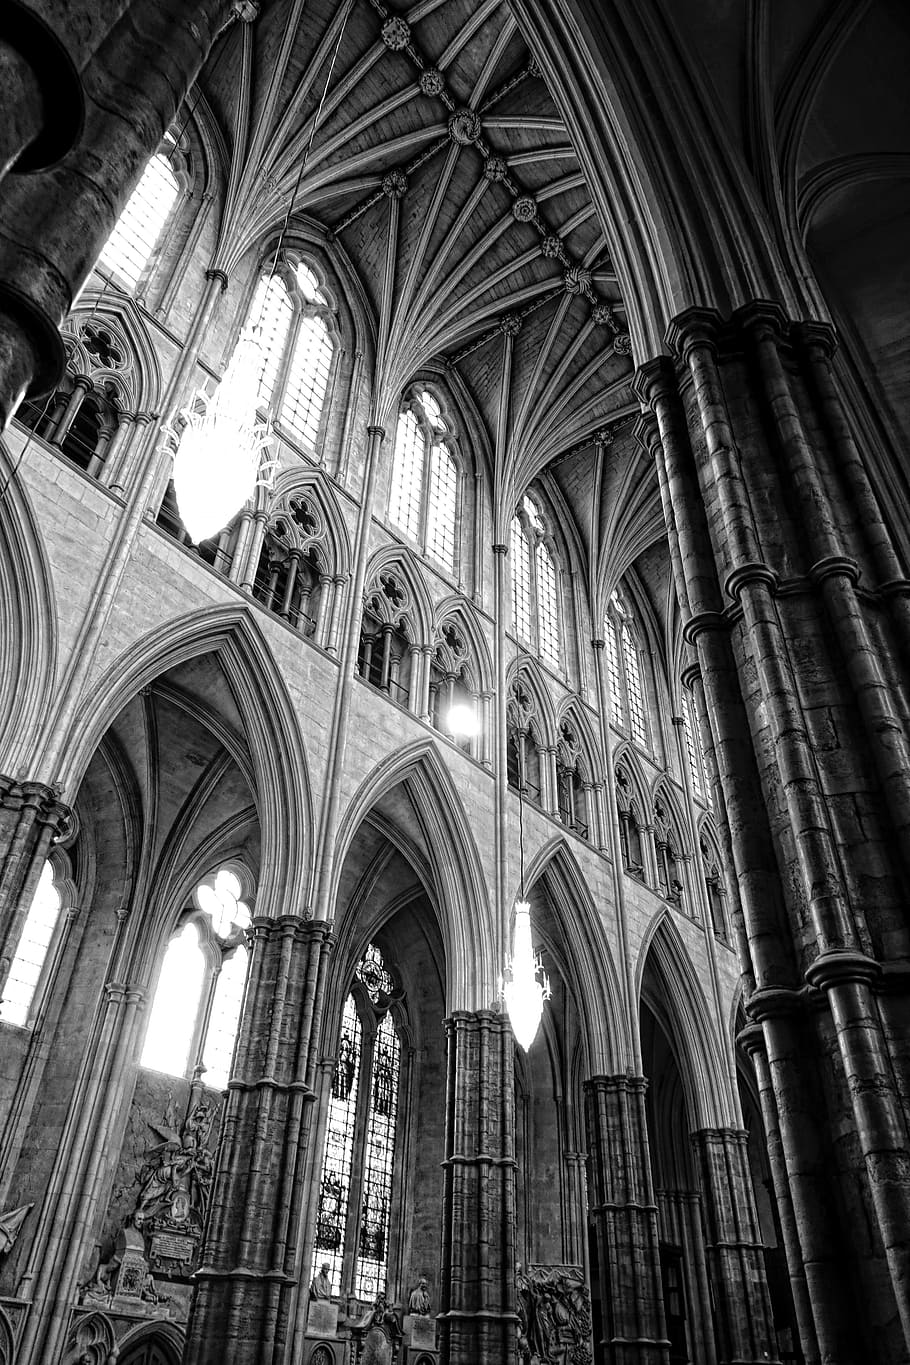 cathedral, nave, stained glass, gothic, westminster abbey, medieval, church, arches, historic, architecture